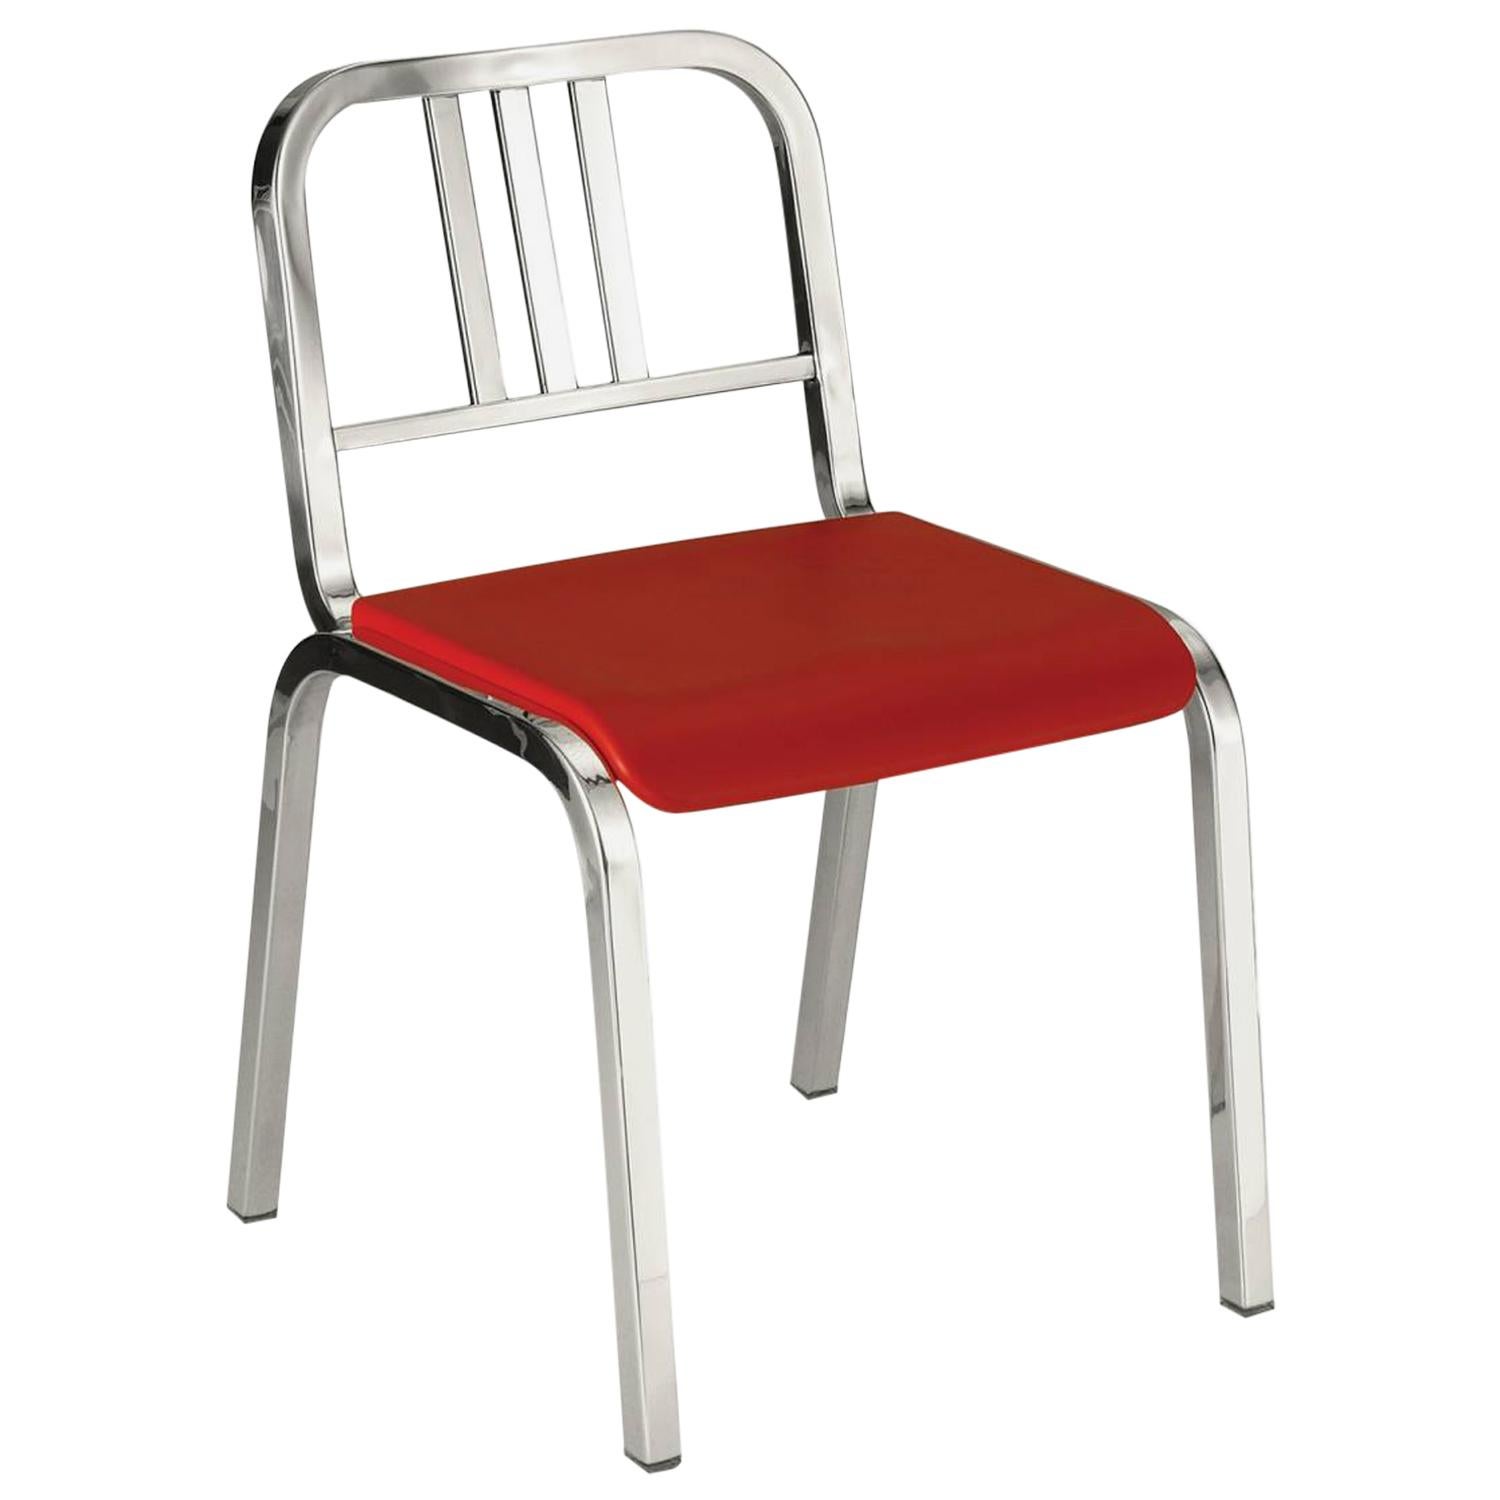 Emeco Nine-0™ Chair in Polished Aluminum W/ Red Seat by Ettore Sottsass